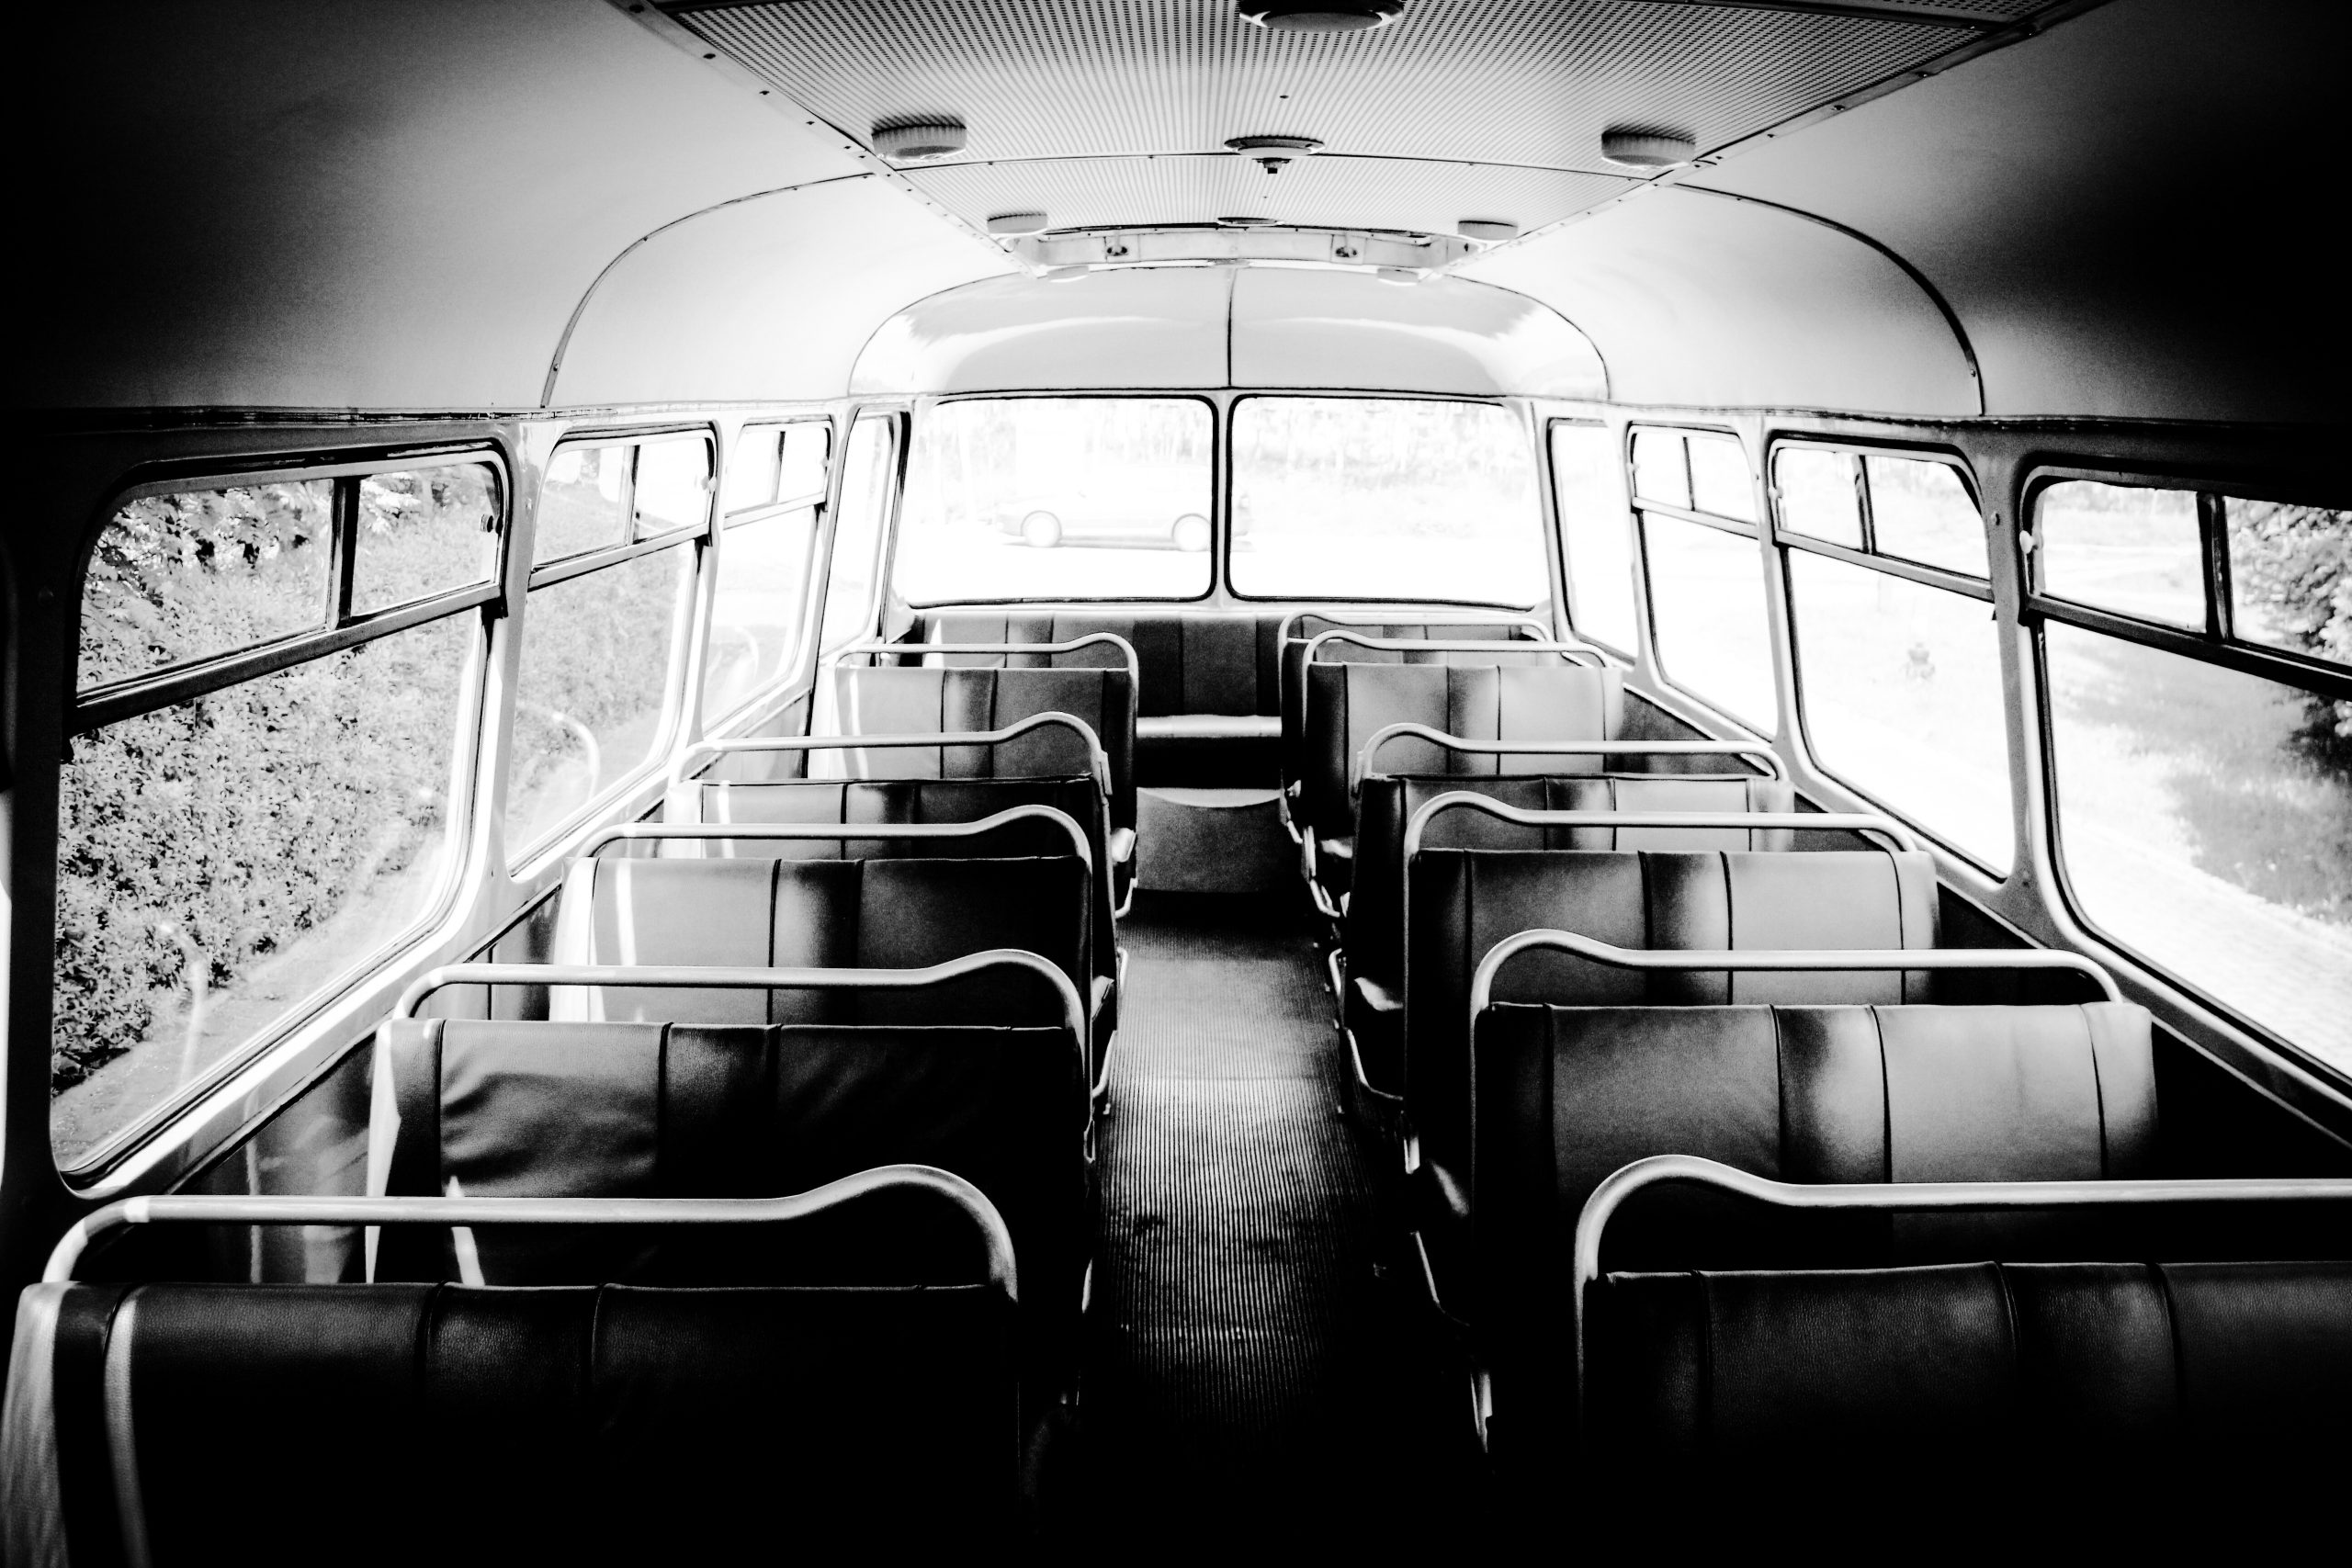 Empty bus in black and white